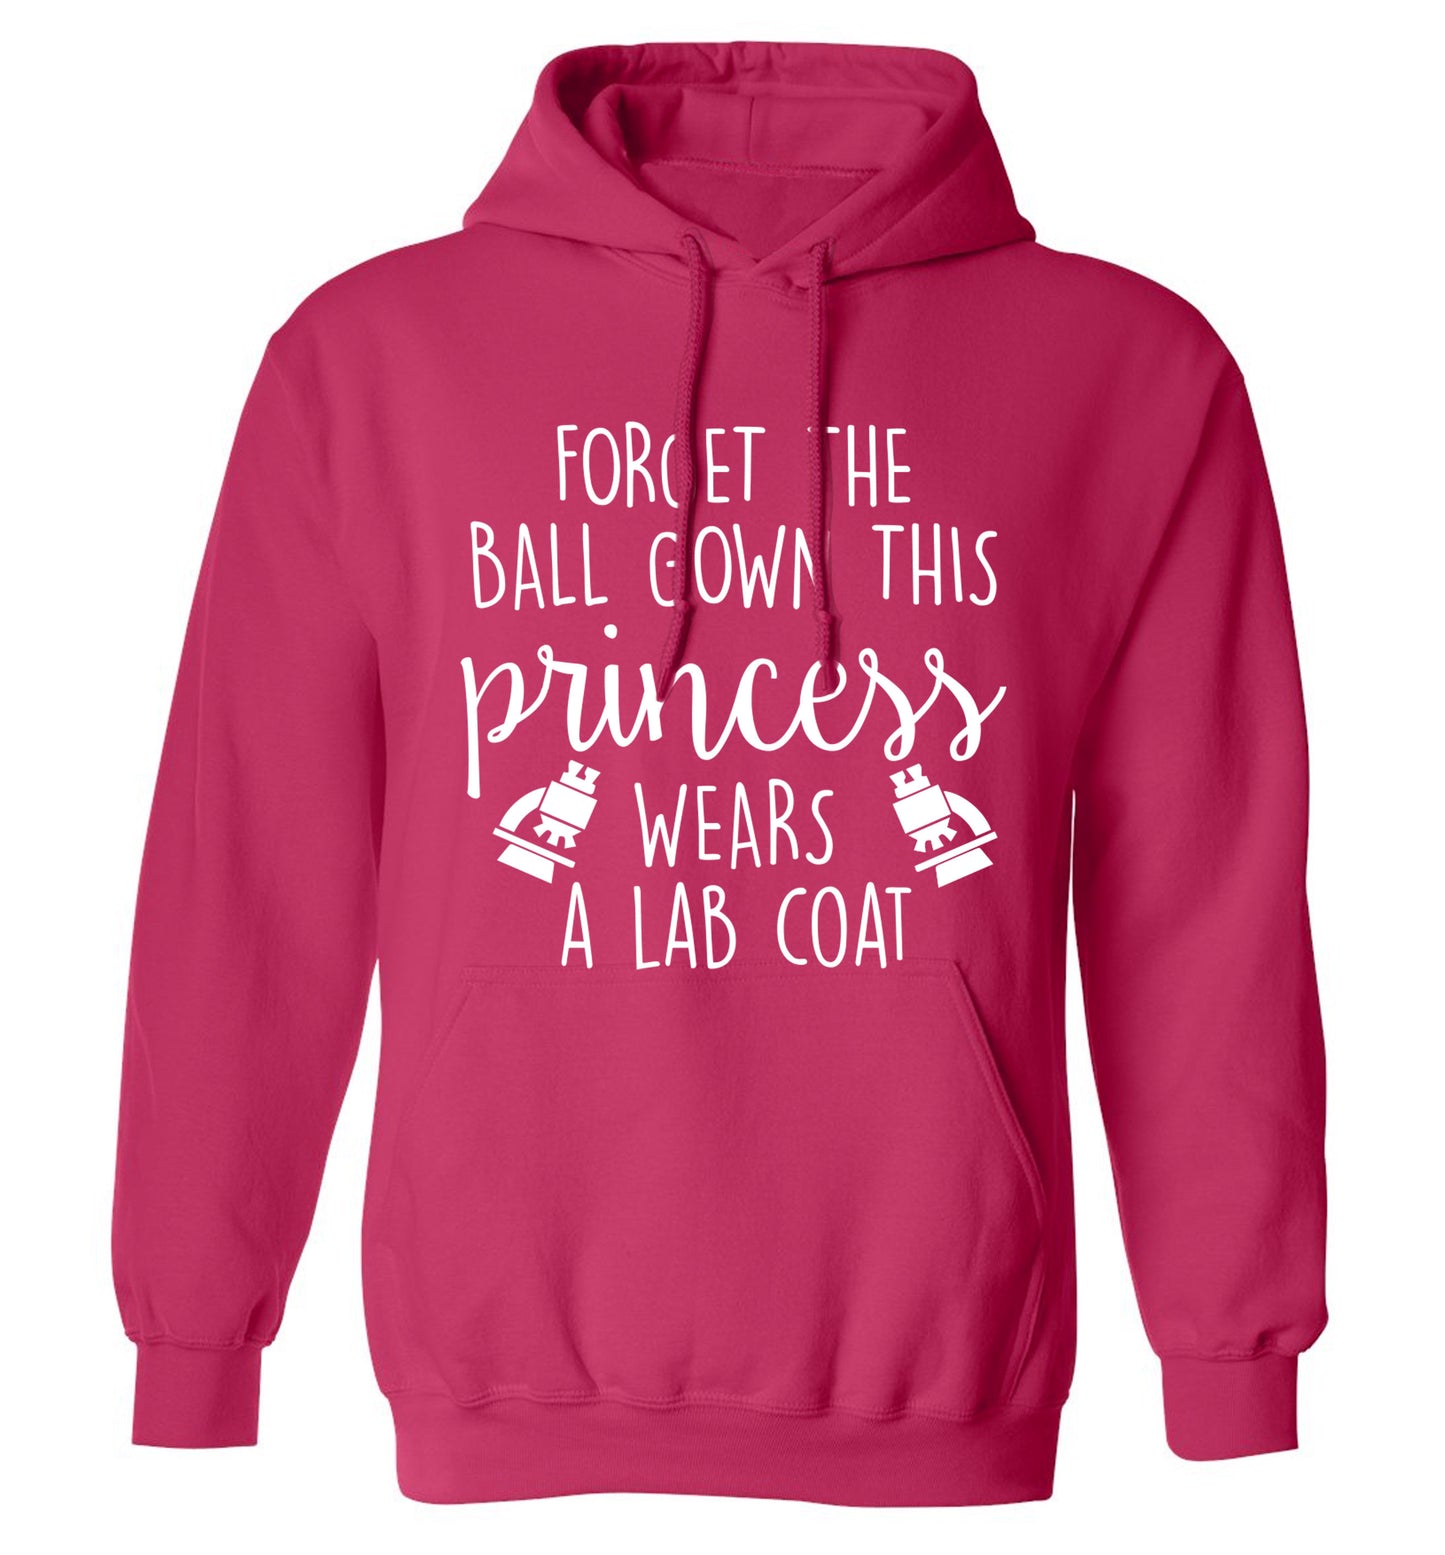 Forget the ball gown this princess wears a lab coat adults unisex pink hoodie 2XL